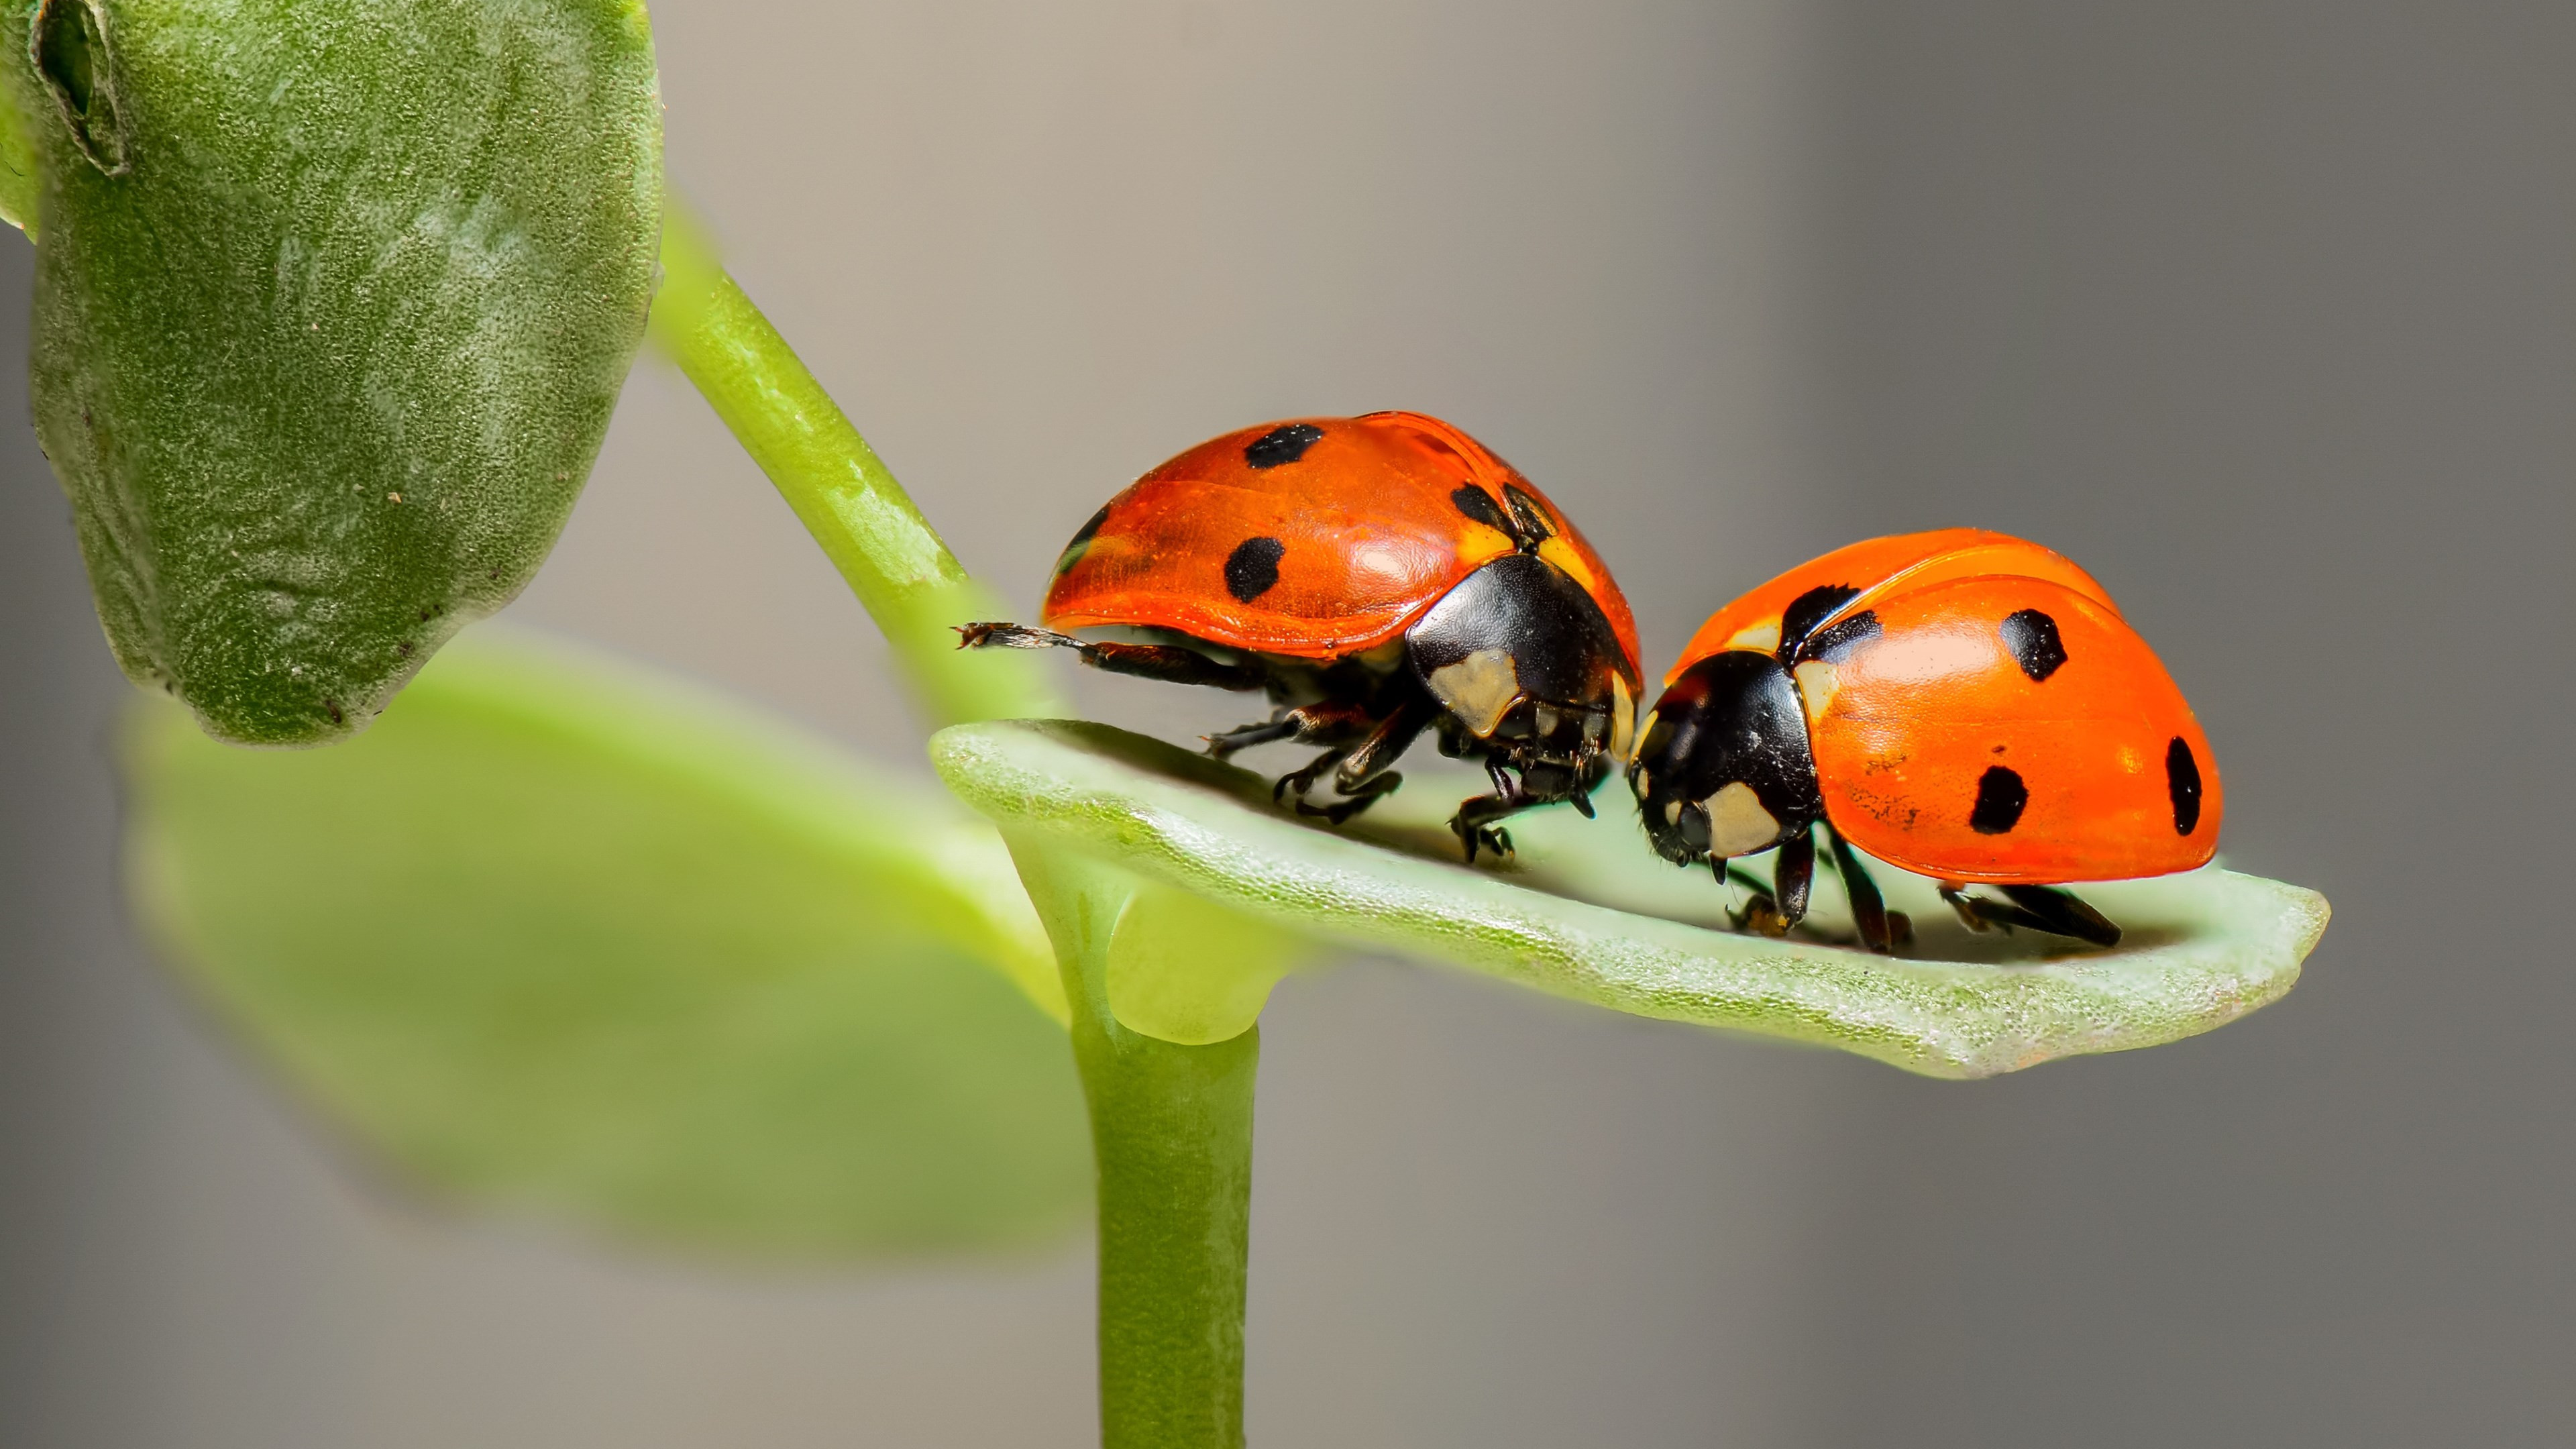 Ladybird, the insect wallpaper 3840x2160